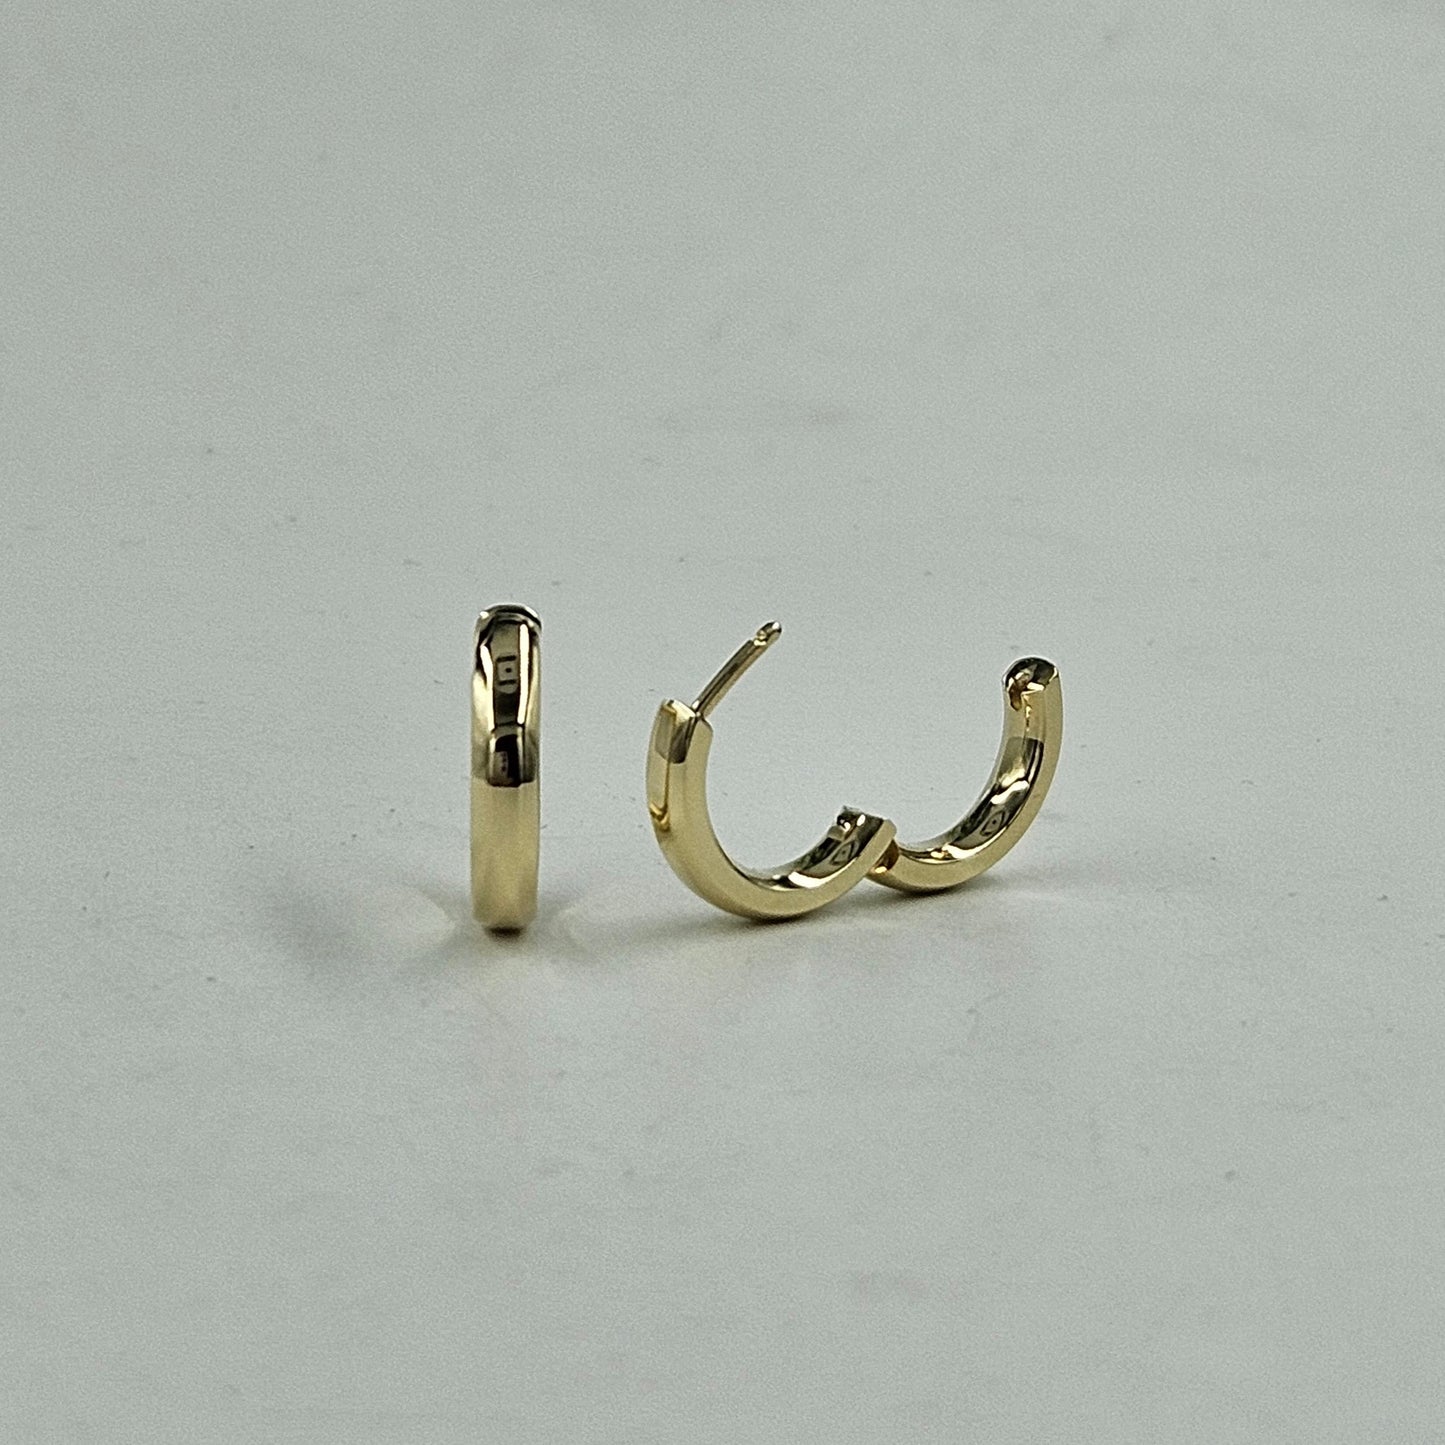 Gold Solid Dome Huggies/Men's & Women's Gold Hoop Earrings/14K-18K Gold 16mm Gold Hoop Earrings/Anniversary gift